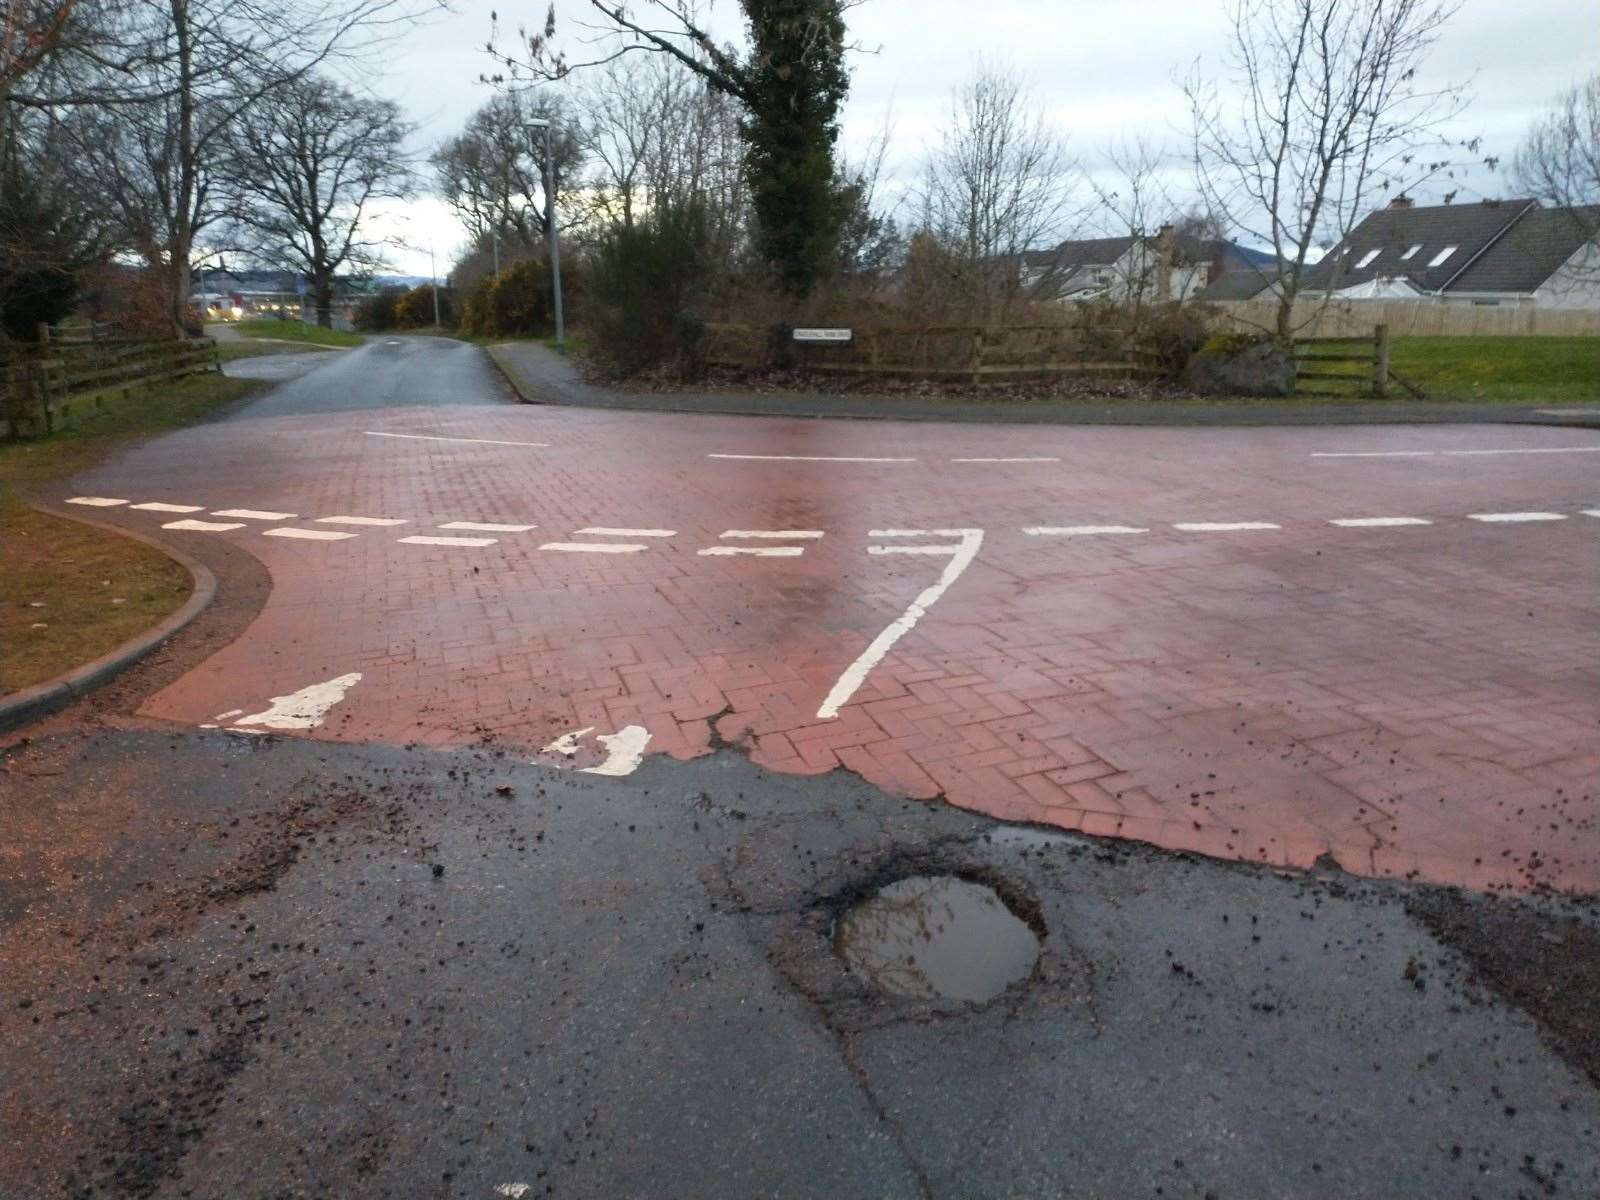 The pothole at the junction of Caulfield Road North and Cradlehall Farm Drive.